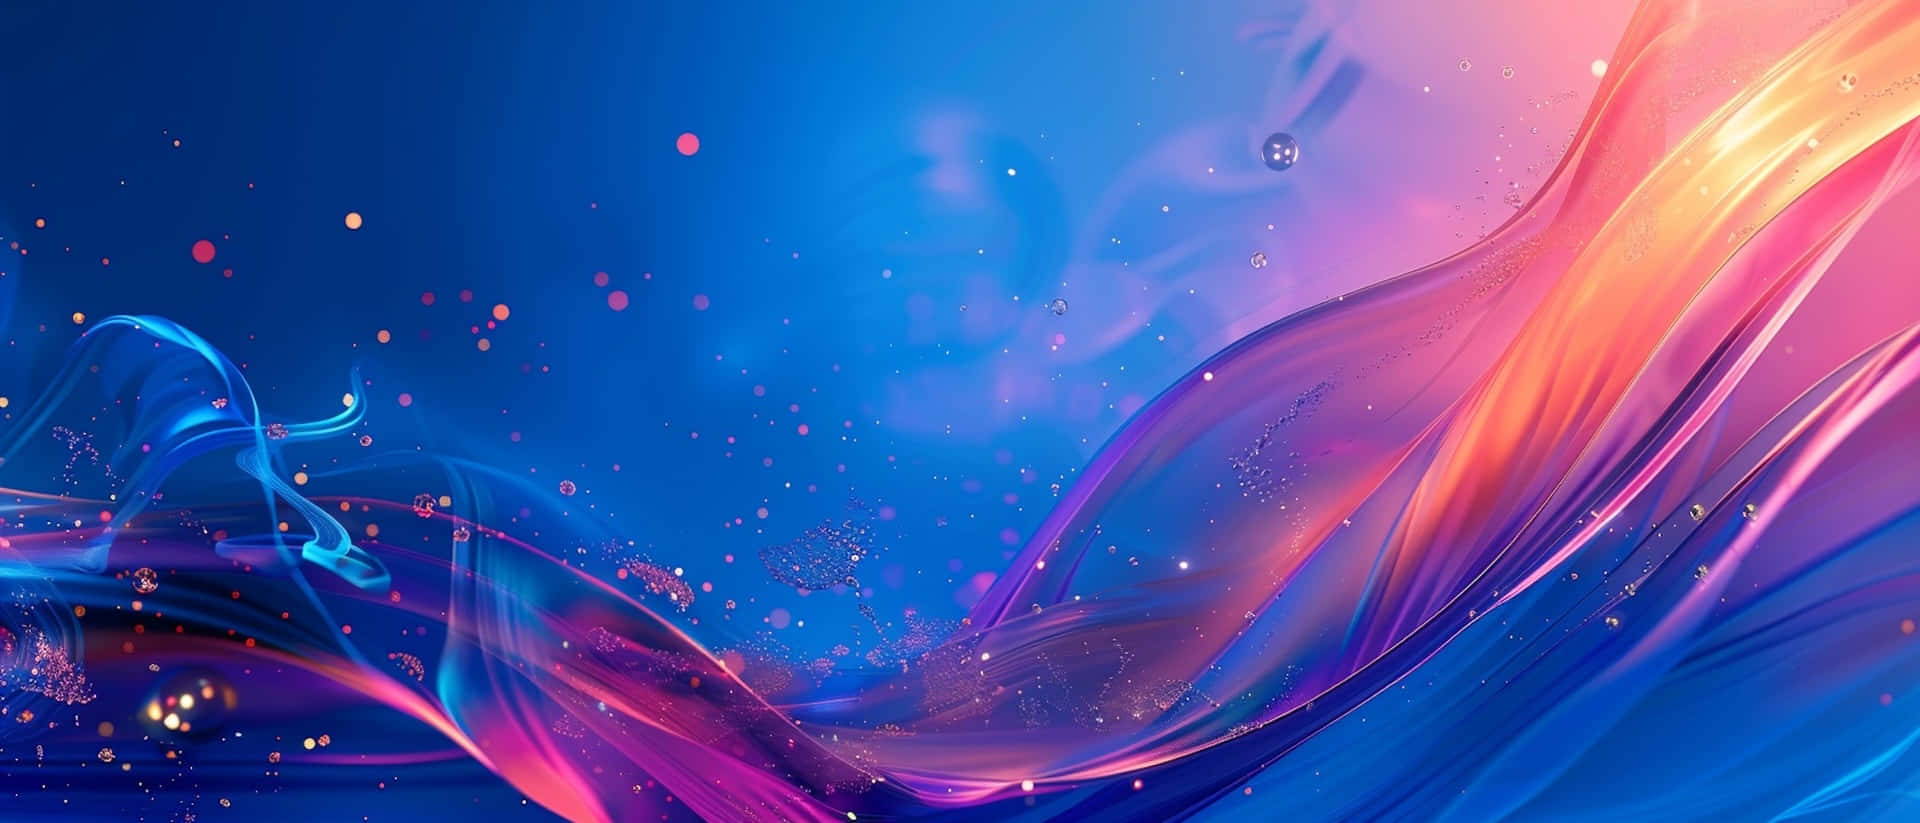 Abstract Flow P S5 Background Wallpaper